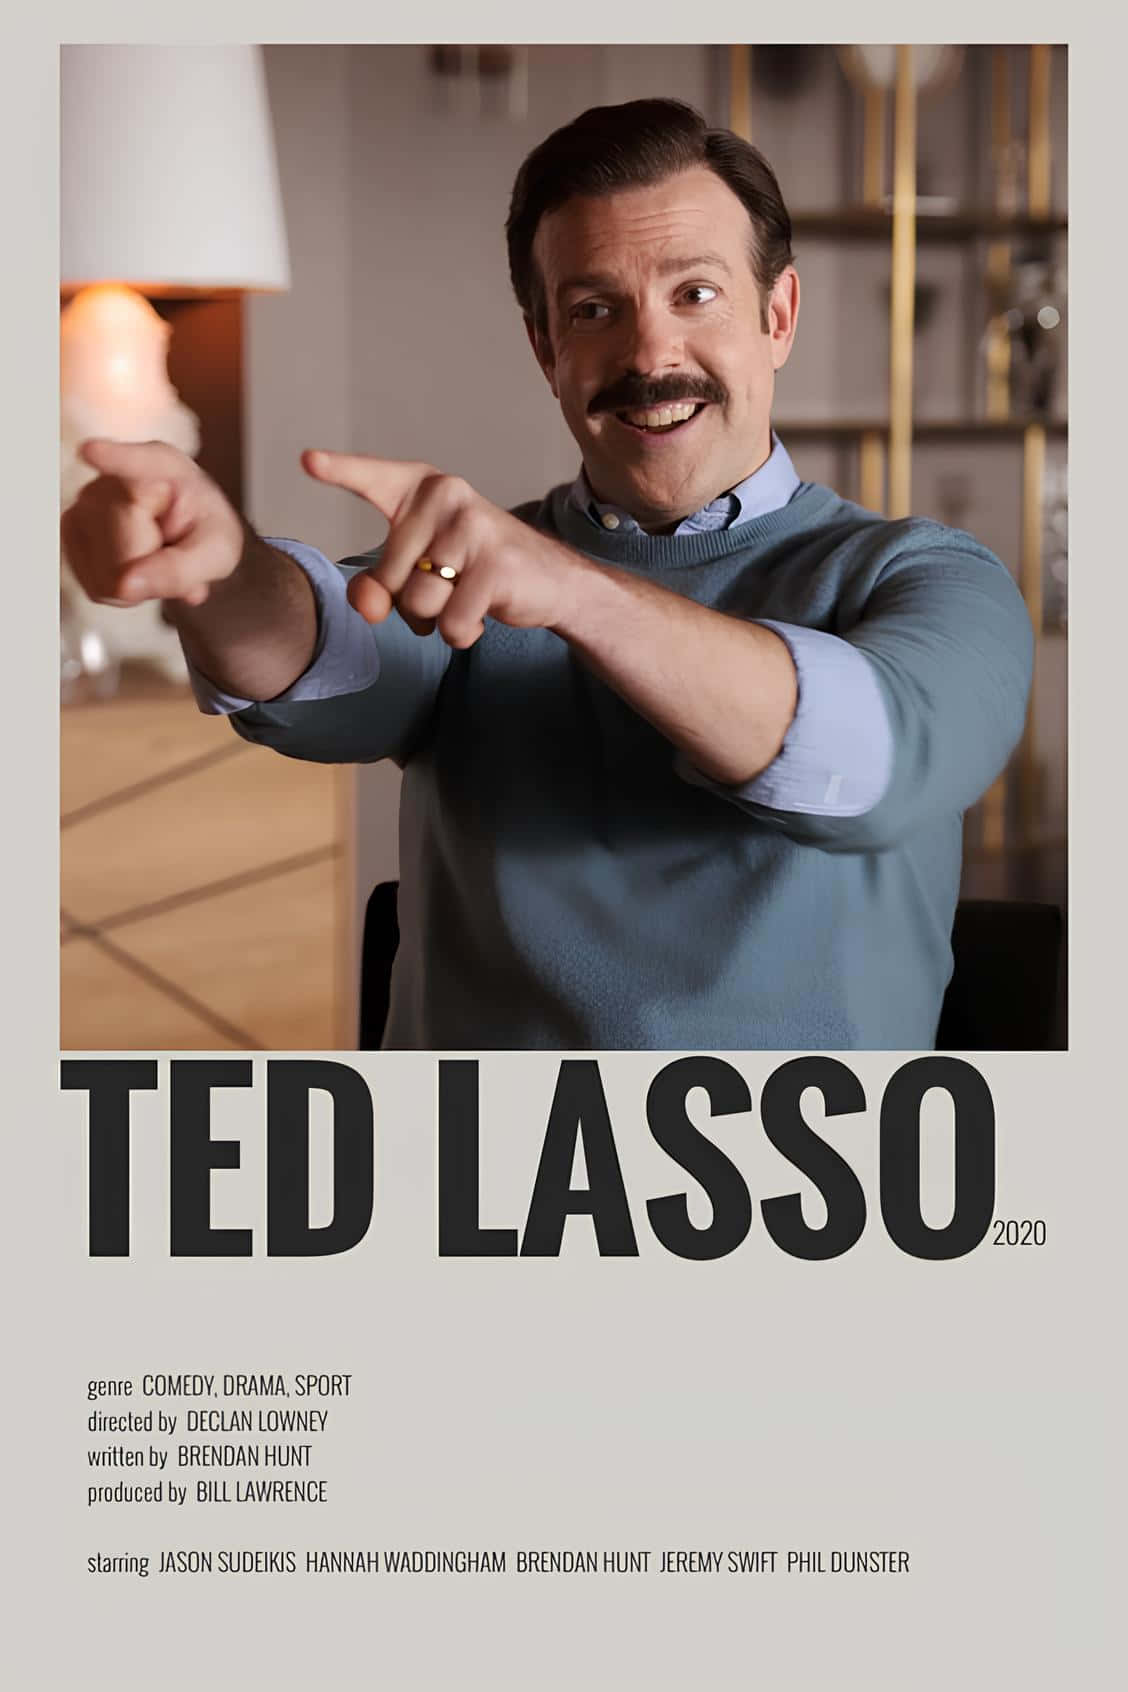 Ted Lasso Poster2020 Wallpaper